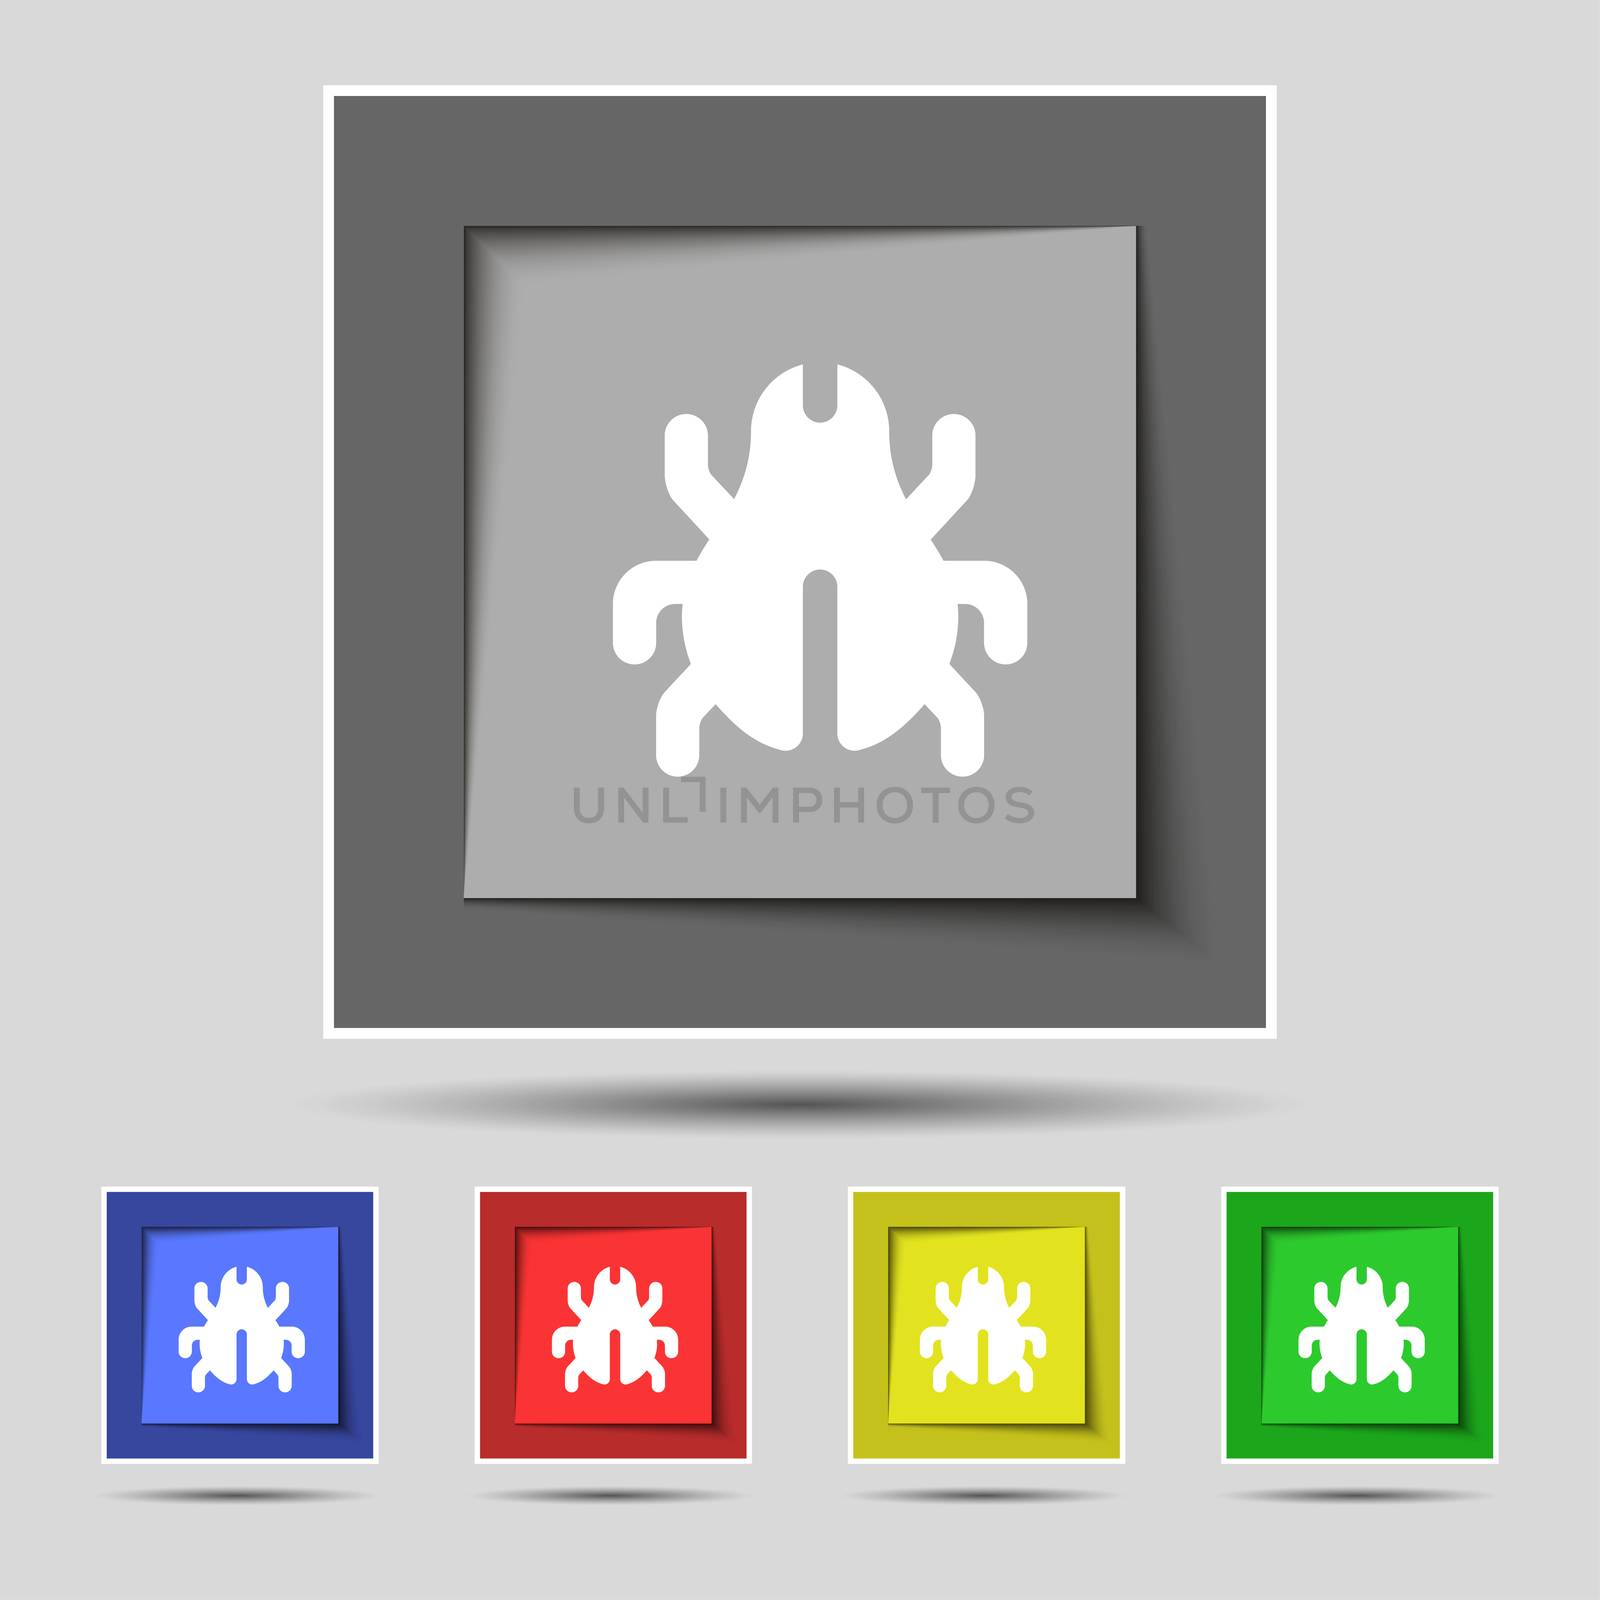 Software Bug, Virus, Disinfection, beetle icon sign on the original five colored buttons.  by serhii_lohvyniuk